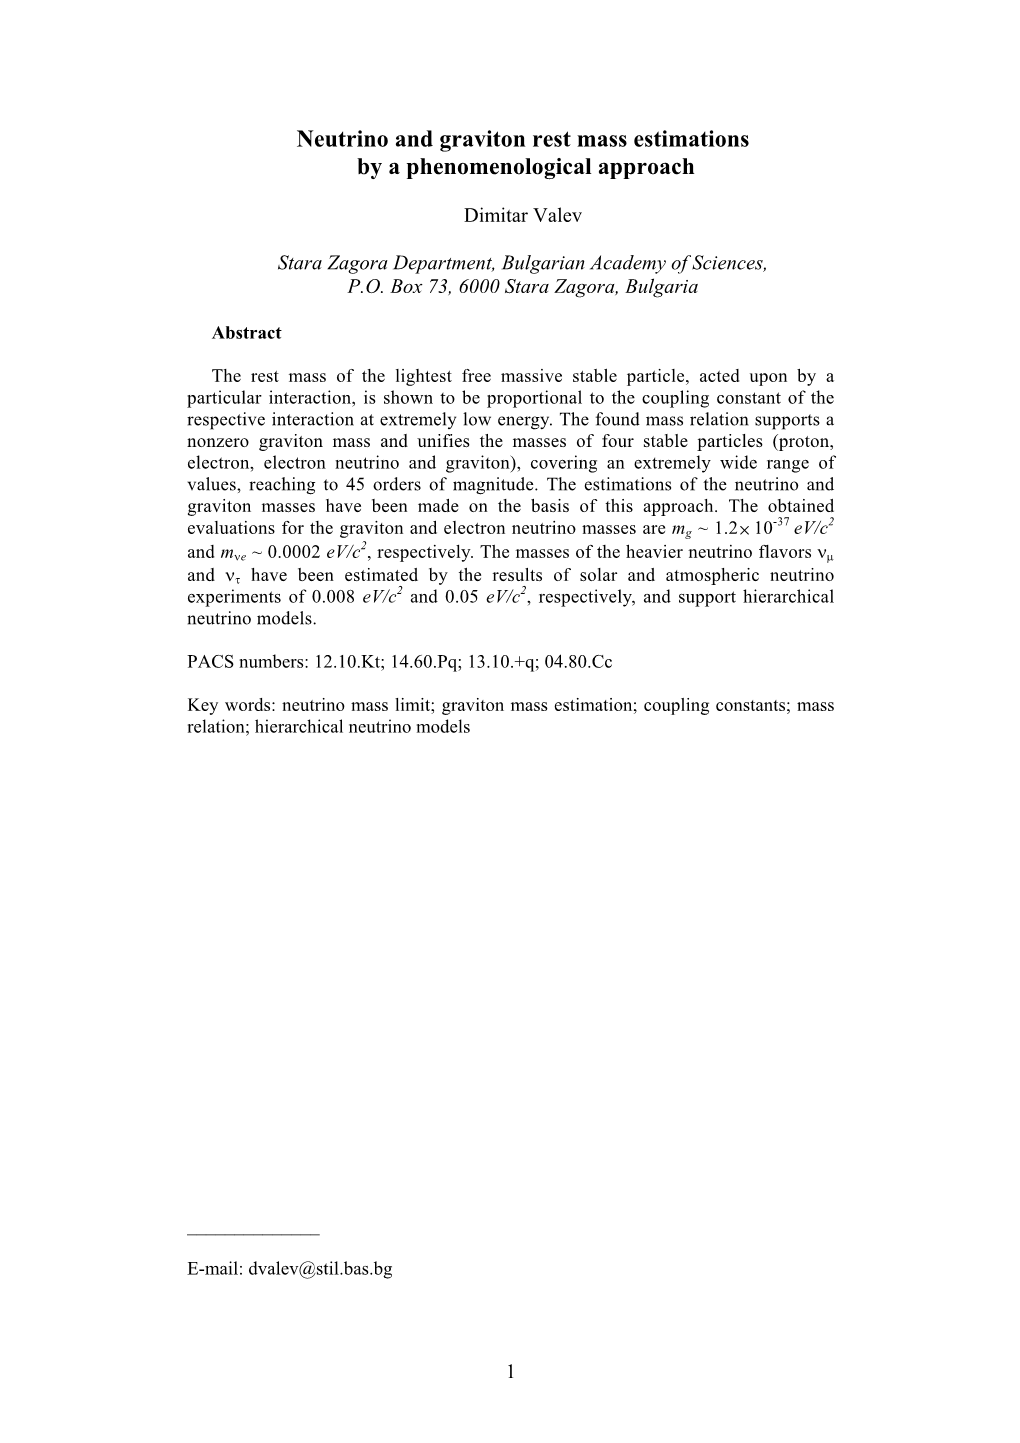 Neutrino and Graviton Rest Mass Estimations by a Phenomenological Approach